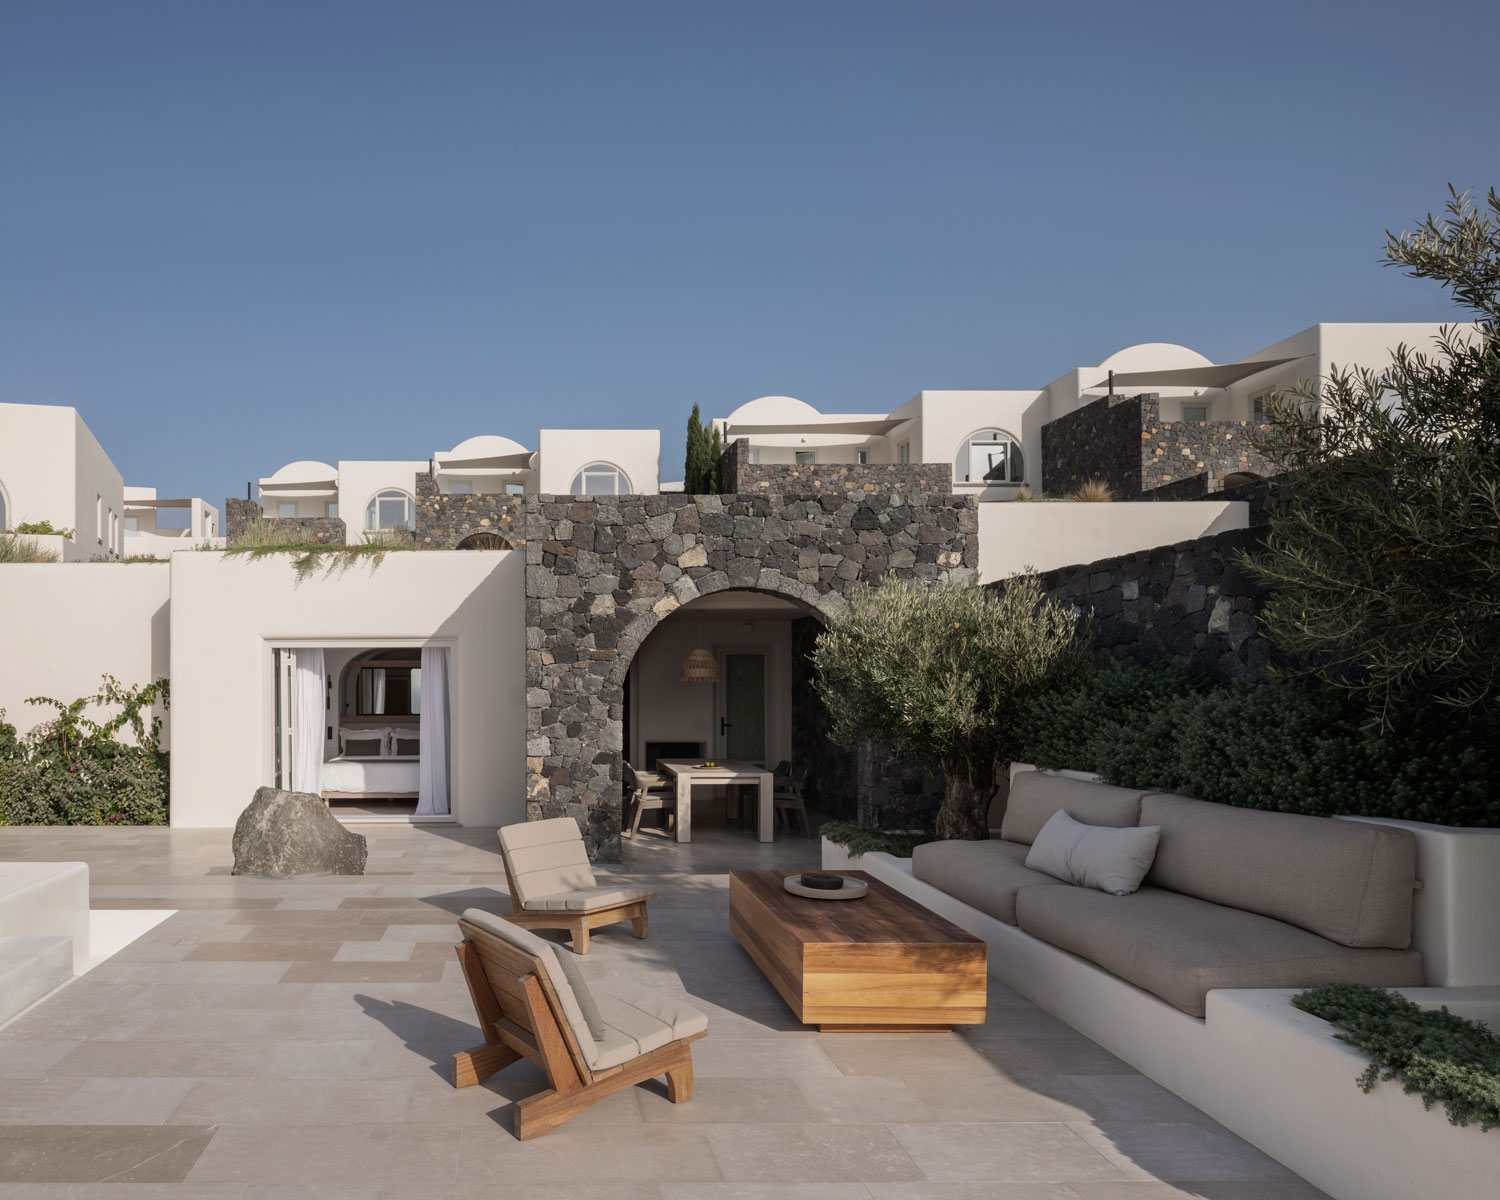 Oia Epitome Hotel Offers Infinite Views To Cycladic Landscape -WWW.AUTHENTICINTERIOR.COM design studio & blog Photography Stale Eriksen